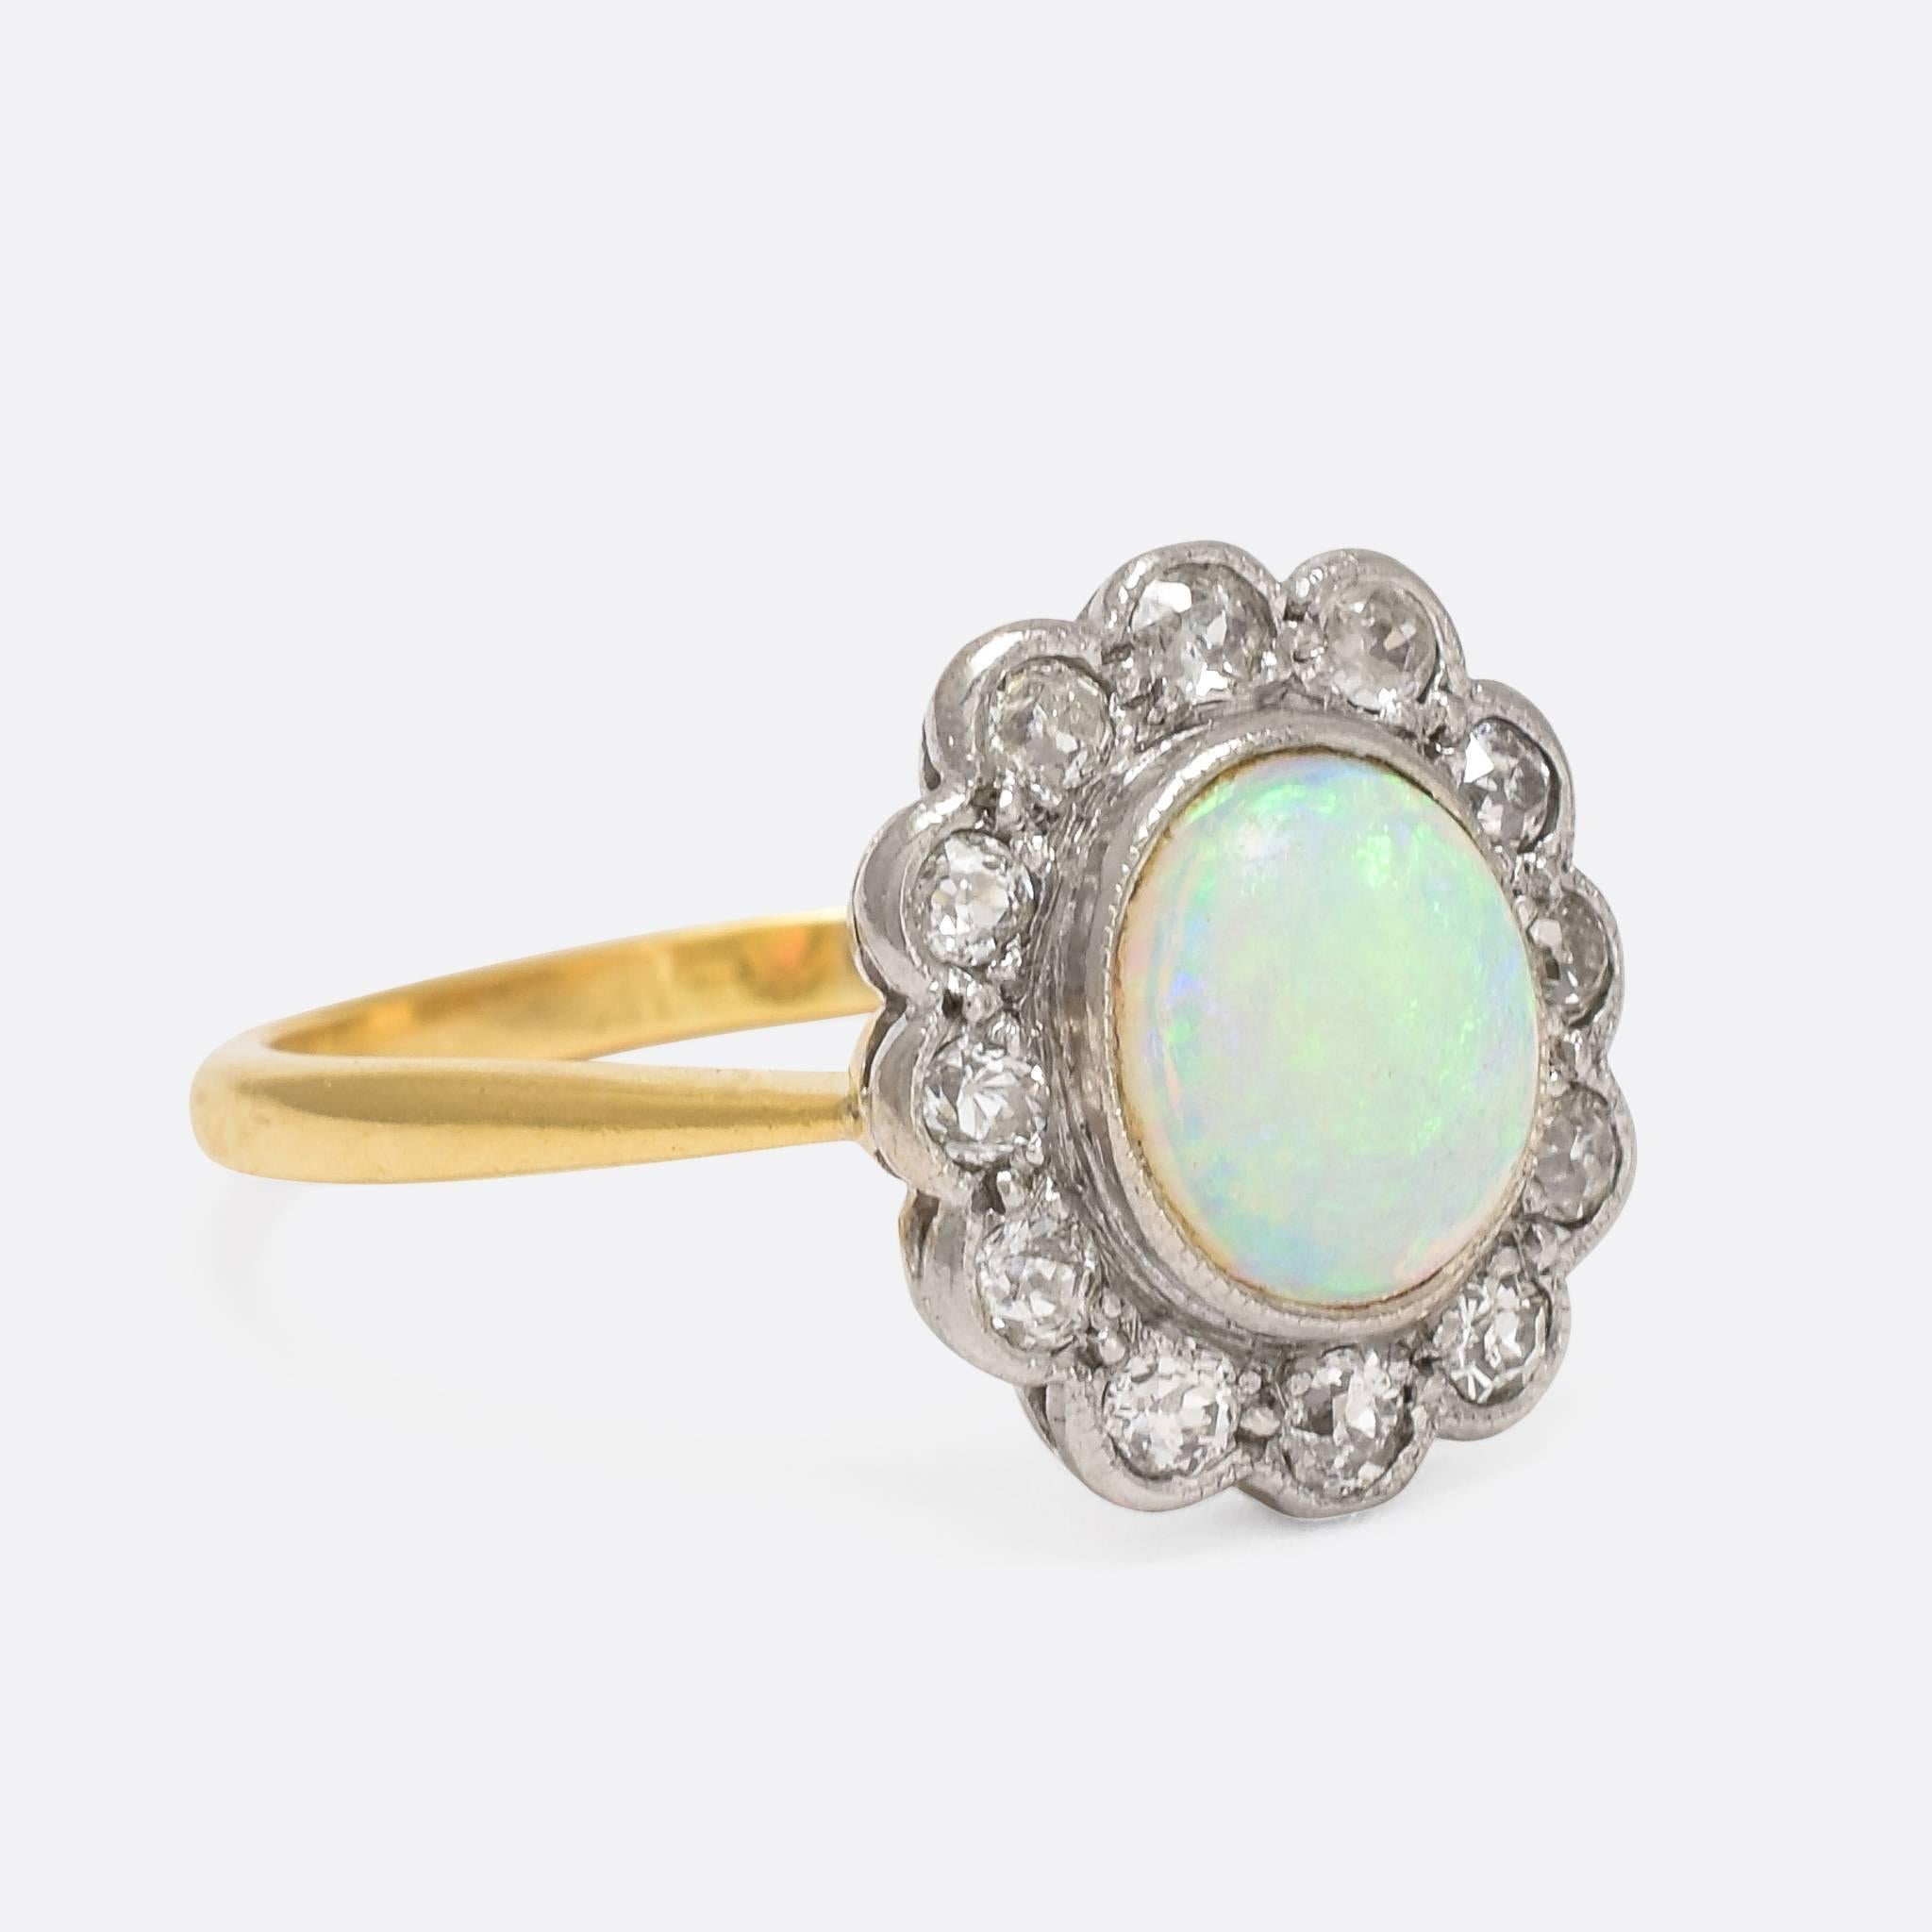 This beautiful antique flower cluster ring is modelled in 18ct gold and platinum, and set with a spectacular opal cabochon - bursting with colour and life - surrounded by a cluster of old cut diamonds. Fine millegrain detail accents the settings,